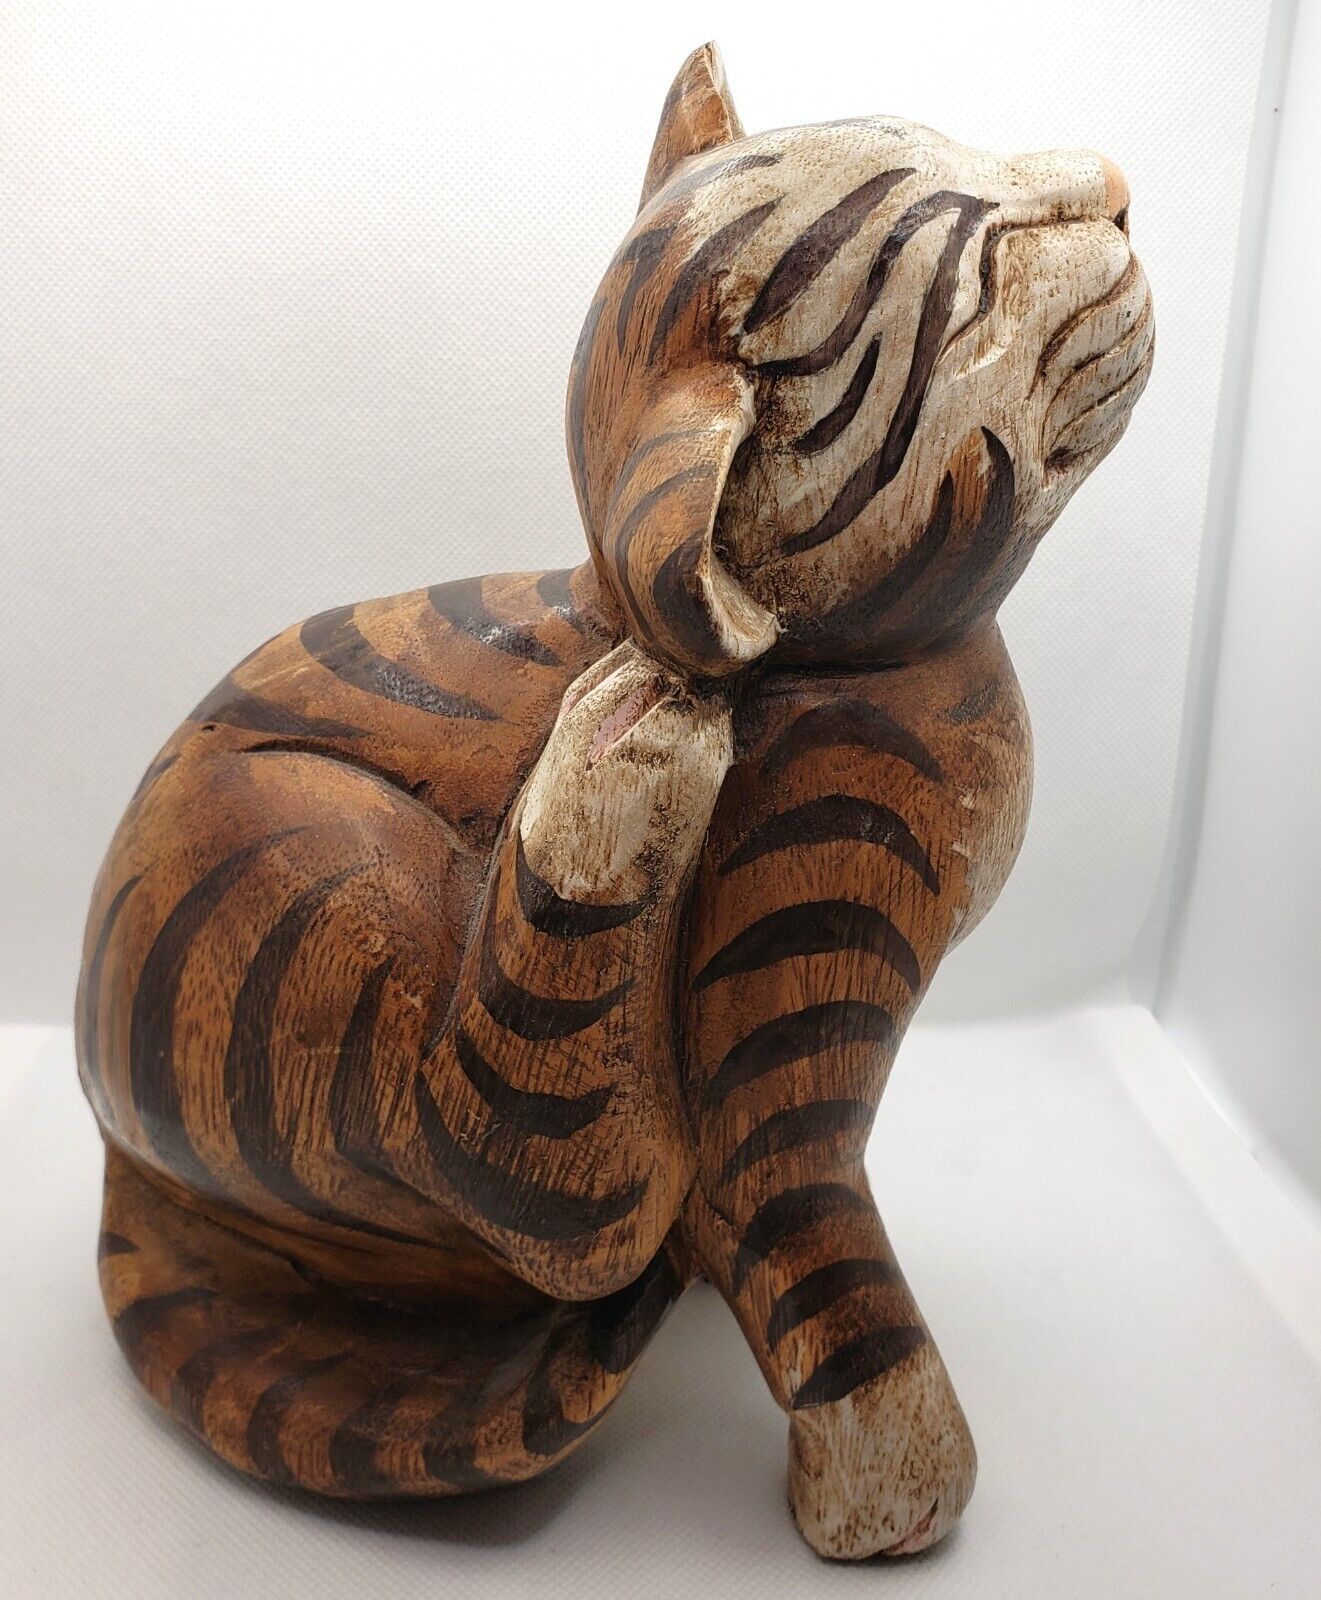 Carved Painted Wood Tabby Cat Figure -9.5 Inches Tall - Weighs 2 Pounds